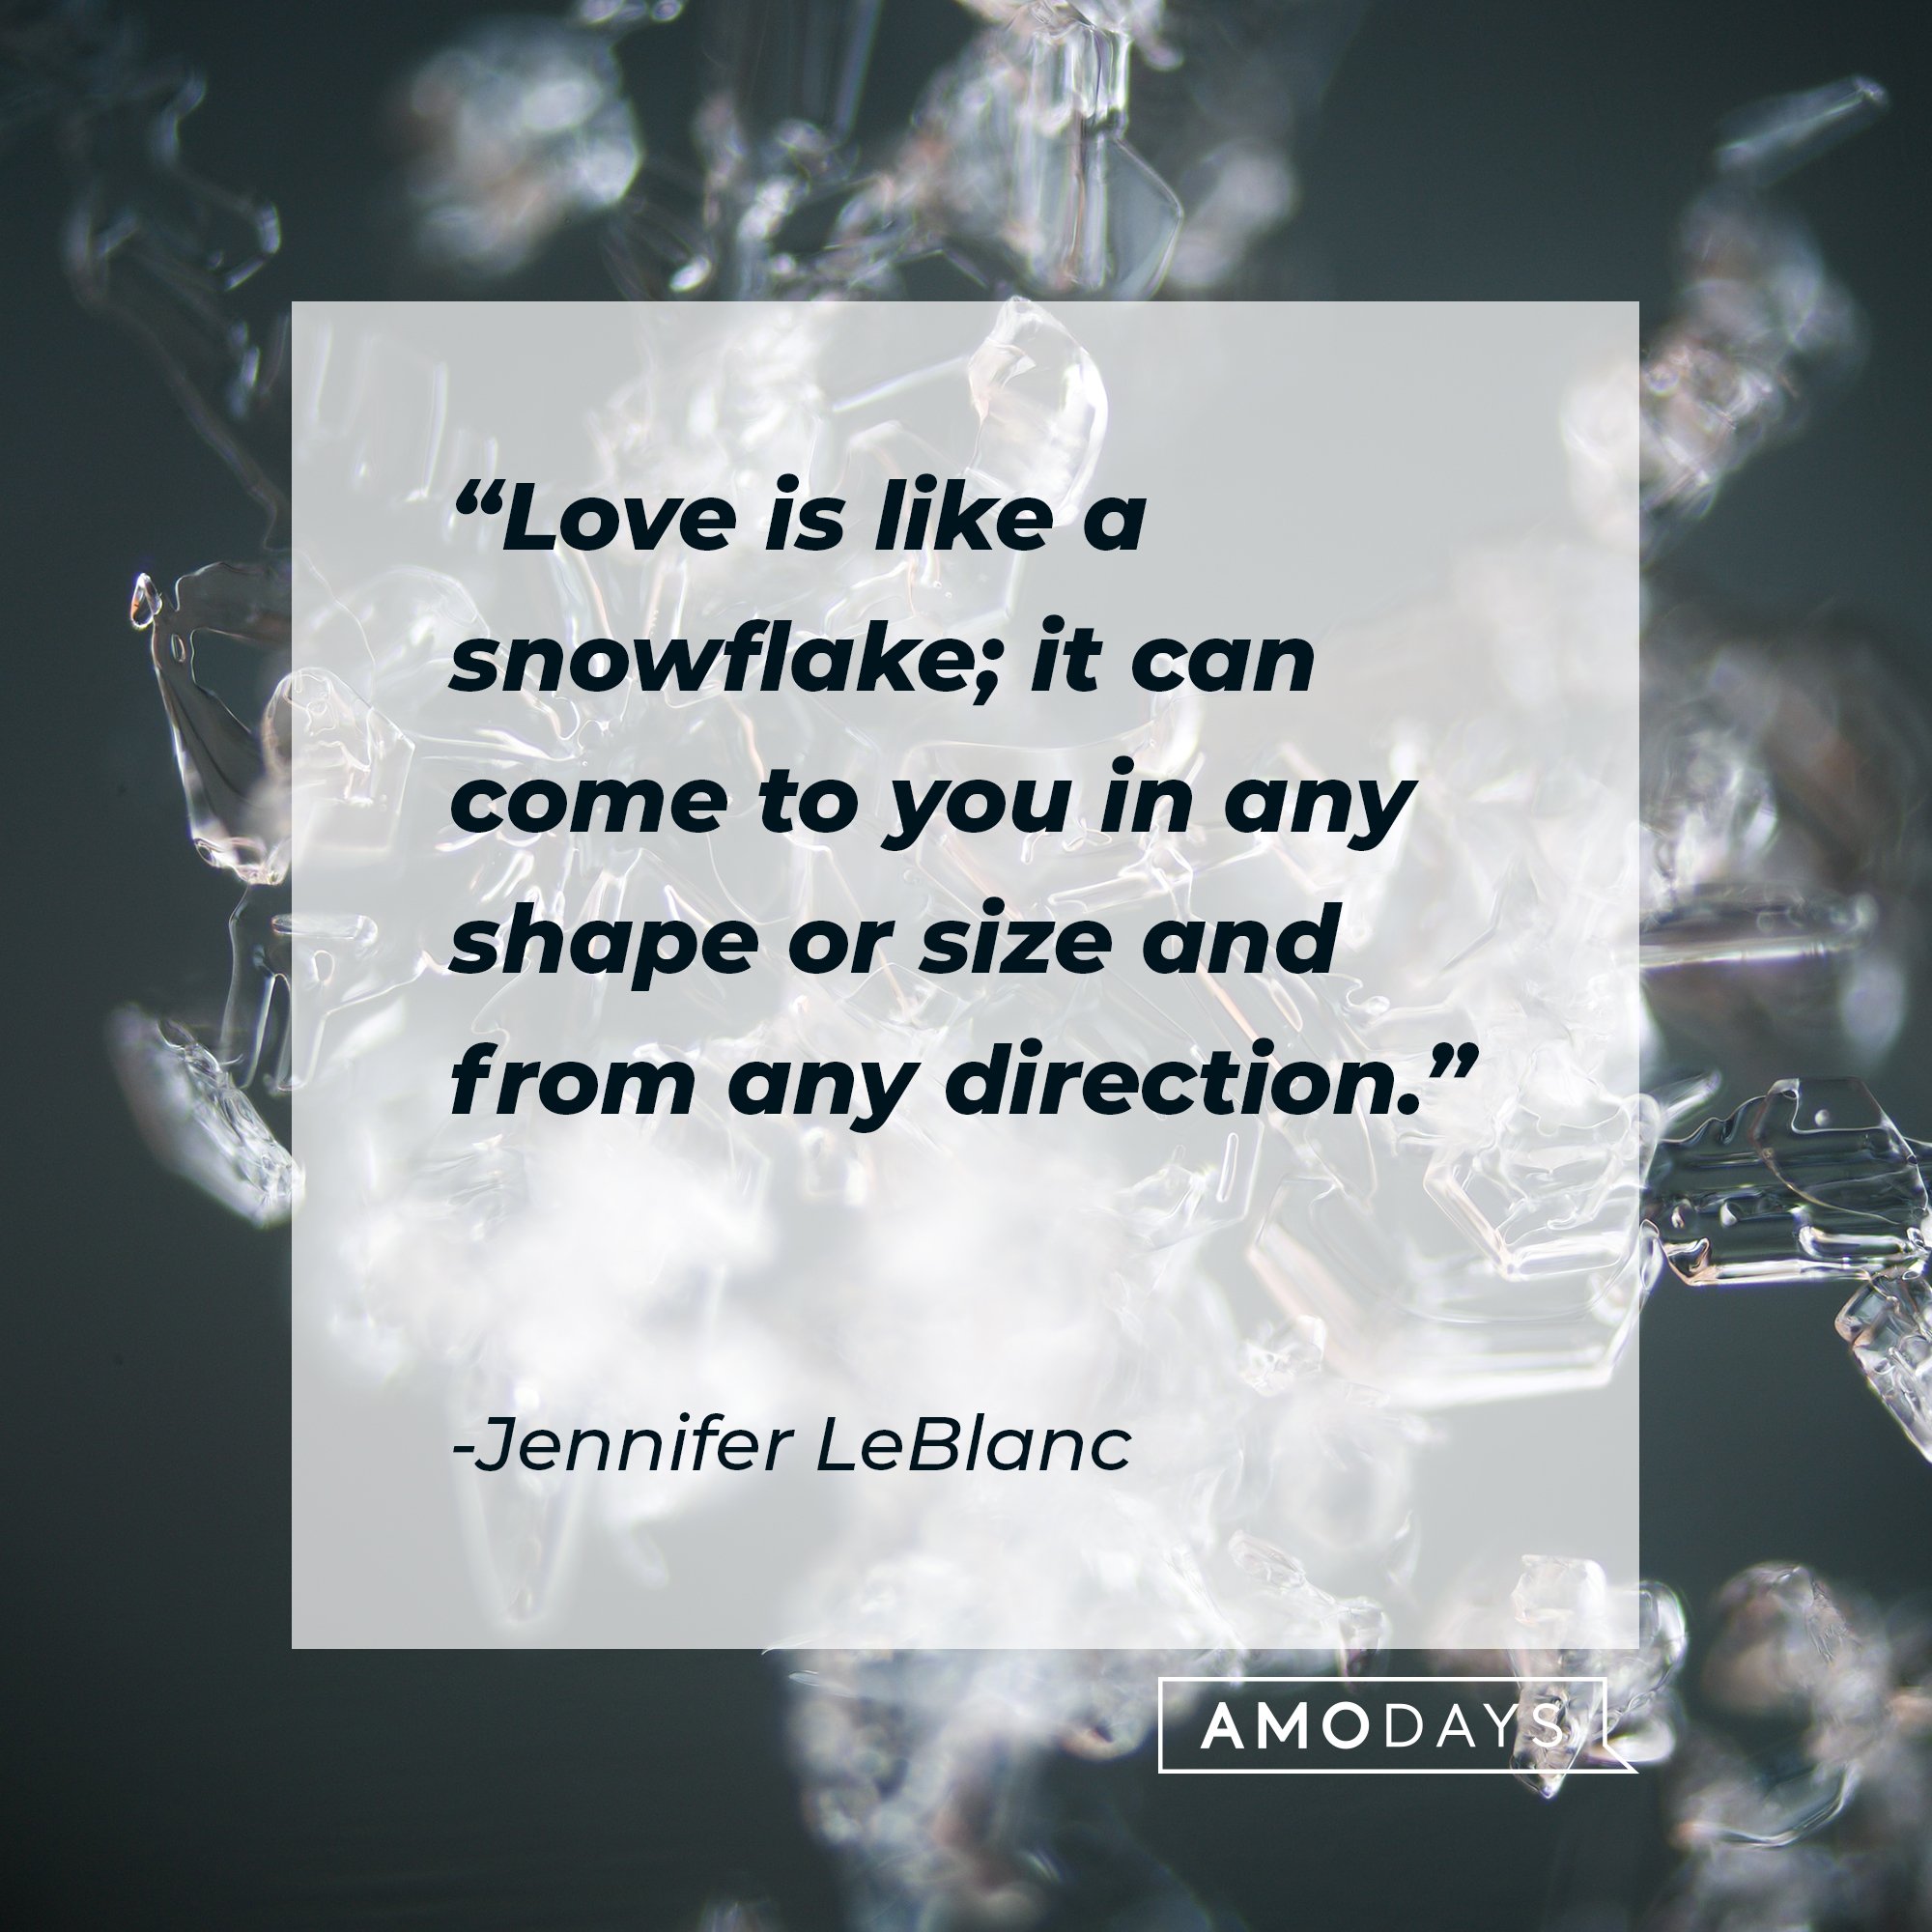 Jennifer LeBlanc’s quote: "Love is like a snowflake; it can come to you in any shape or size and from any direction." | Image: AmoDays